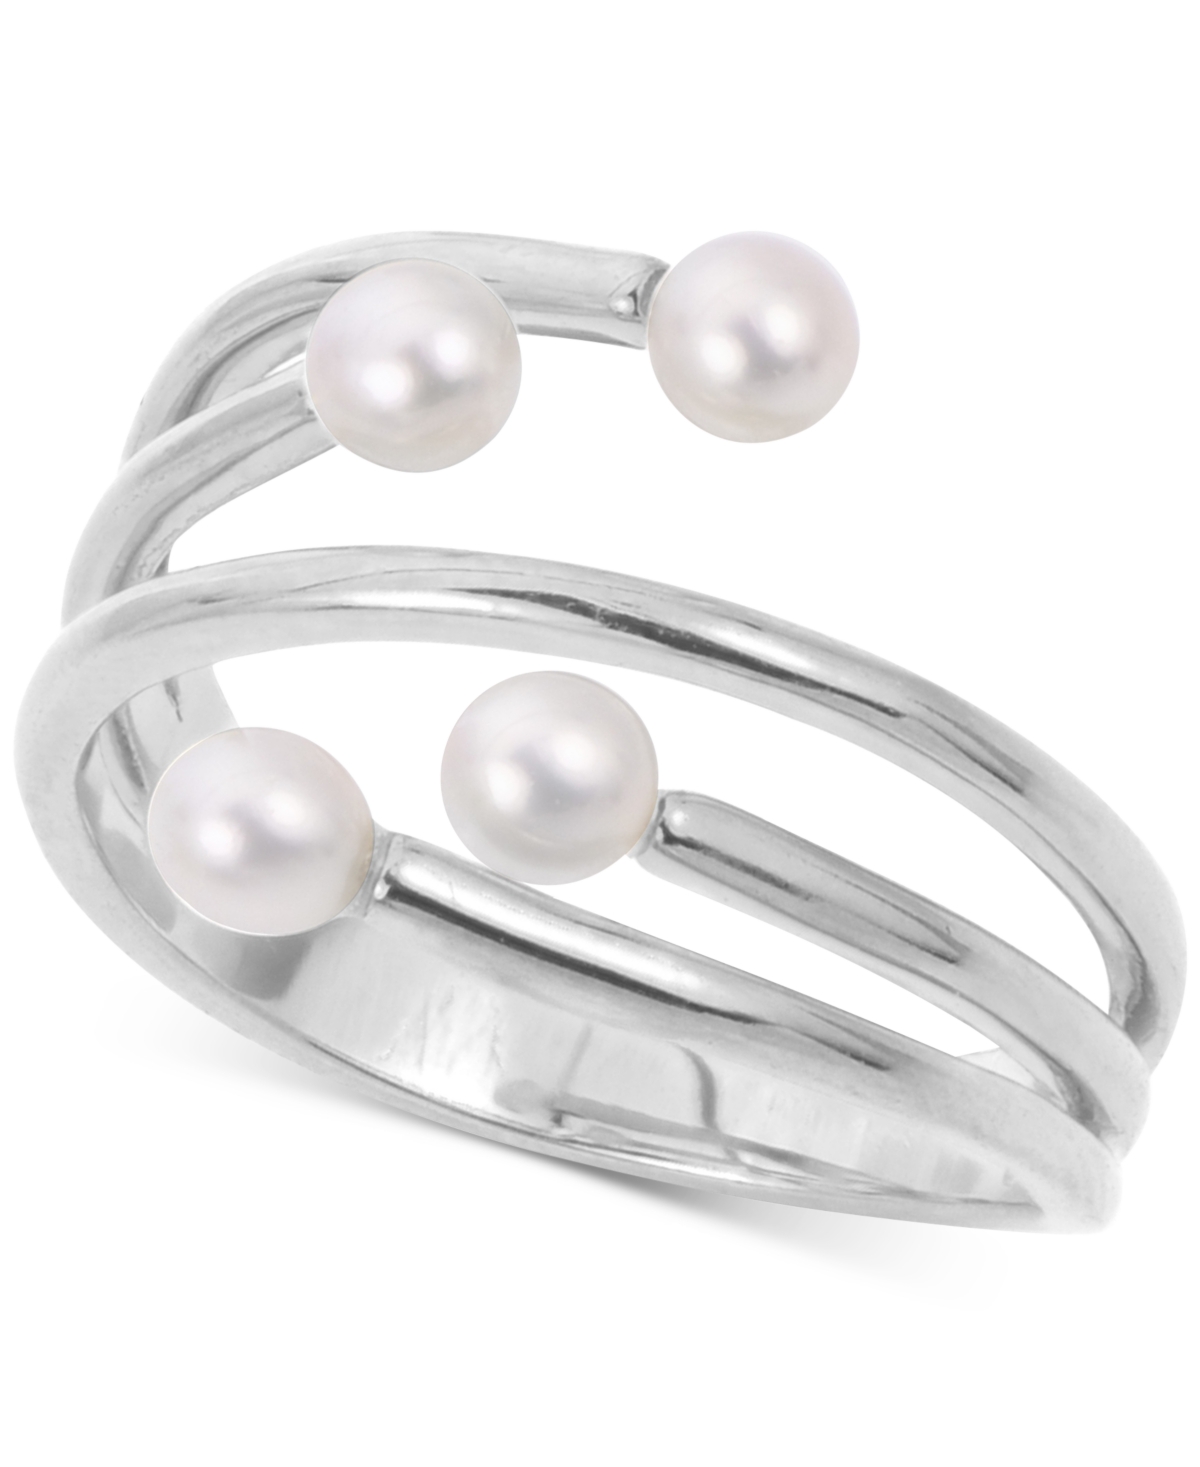 Cultured Freshwater Pearl (3-1/2 - 4mm) Wrap Ring in Sterling Silver - Silver